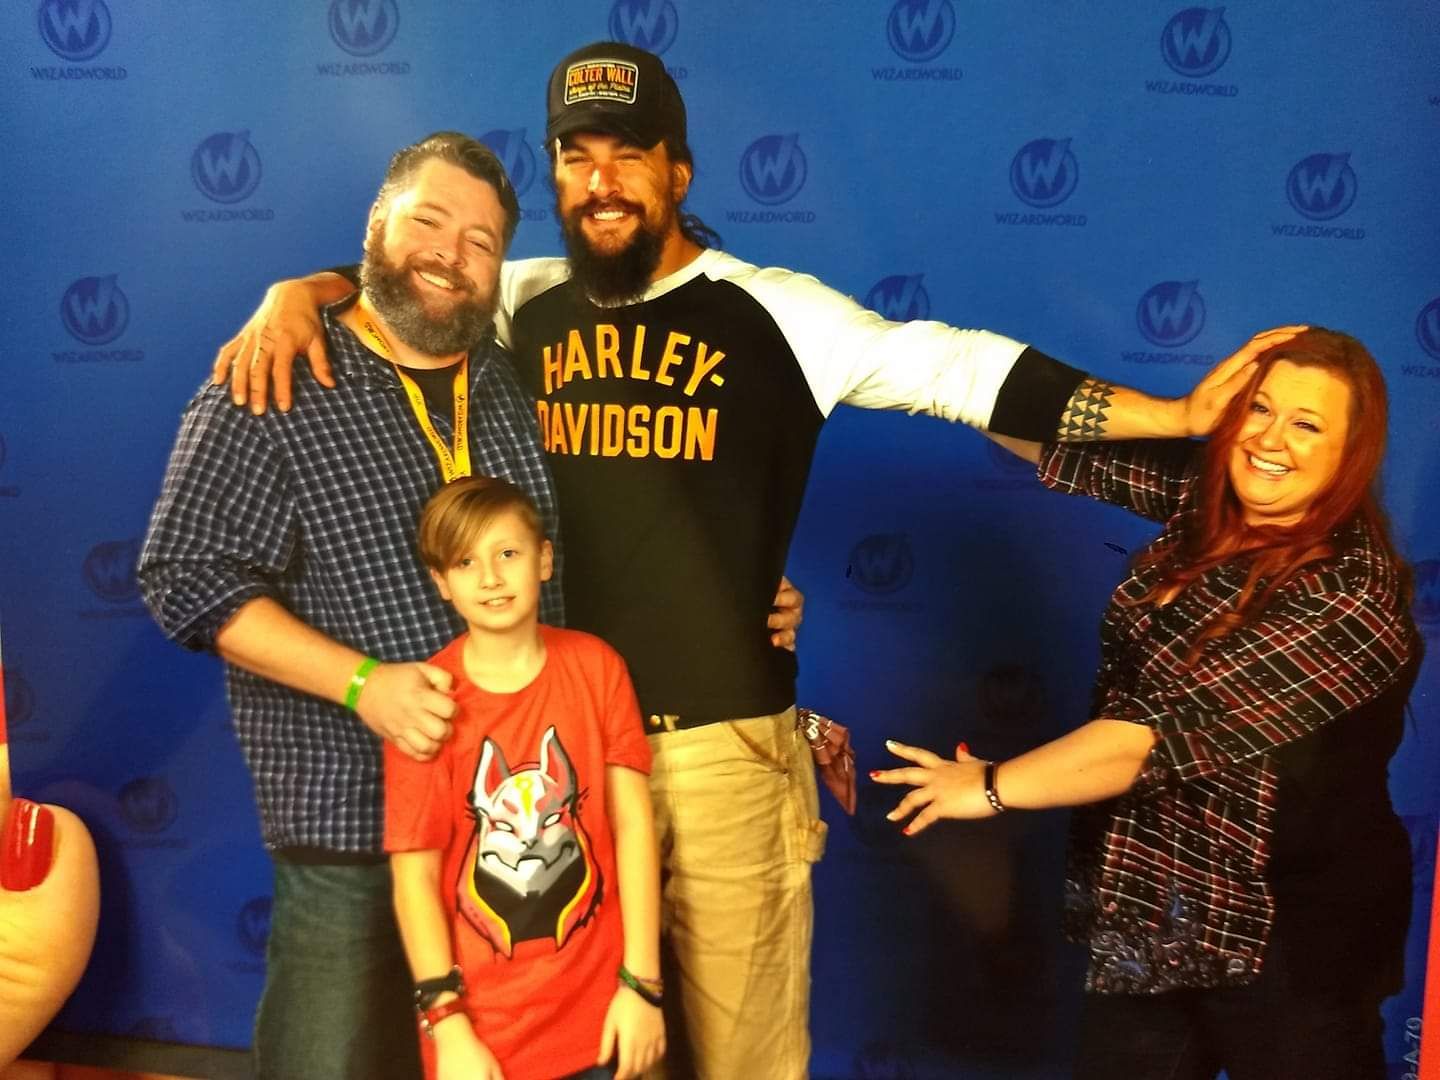 That one time we met Jason Momoa and my husband came up with this great idea. Two years later and I haven't washed my hair!